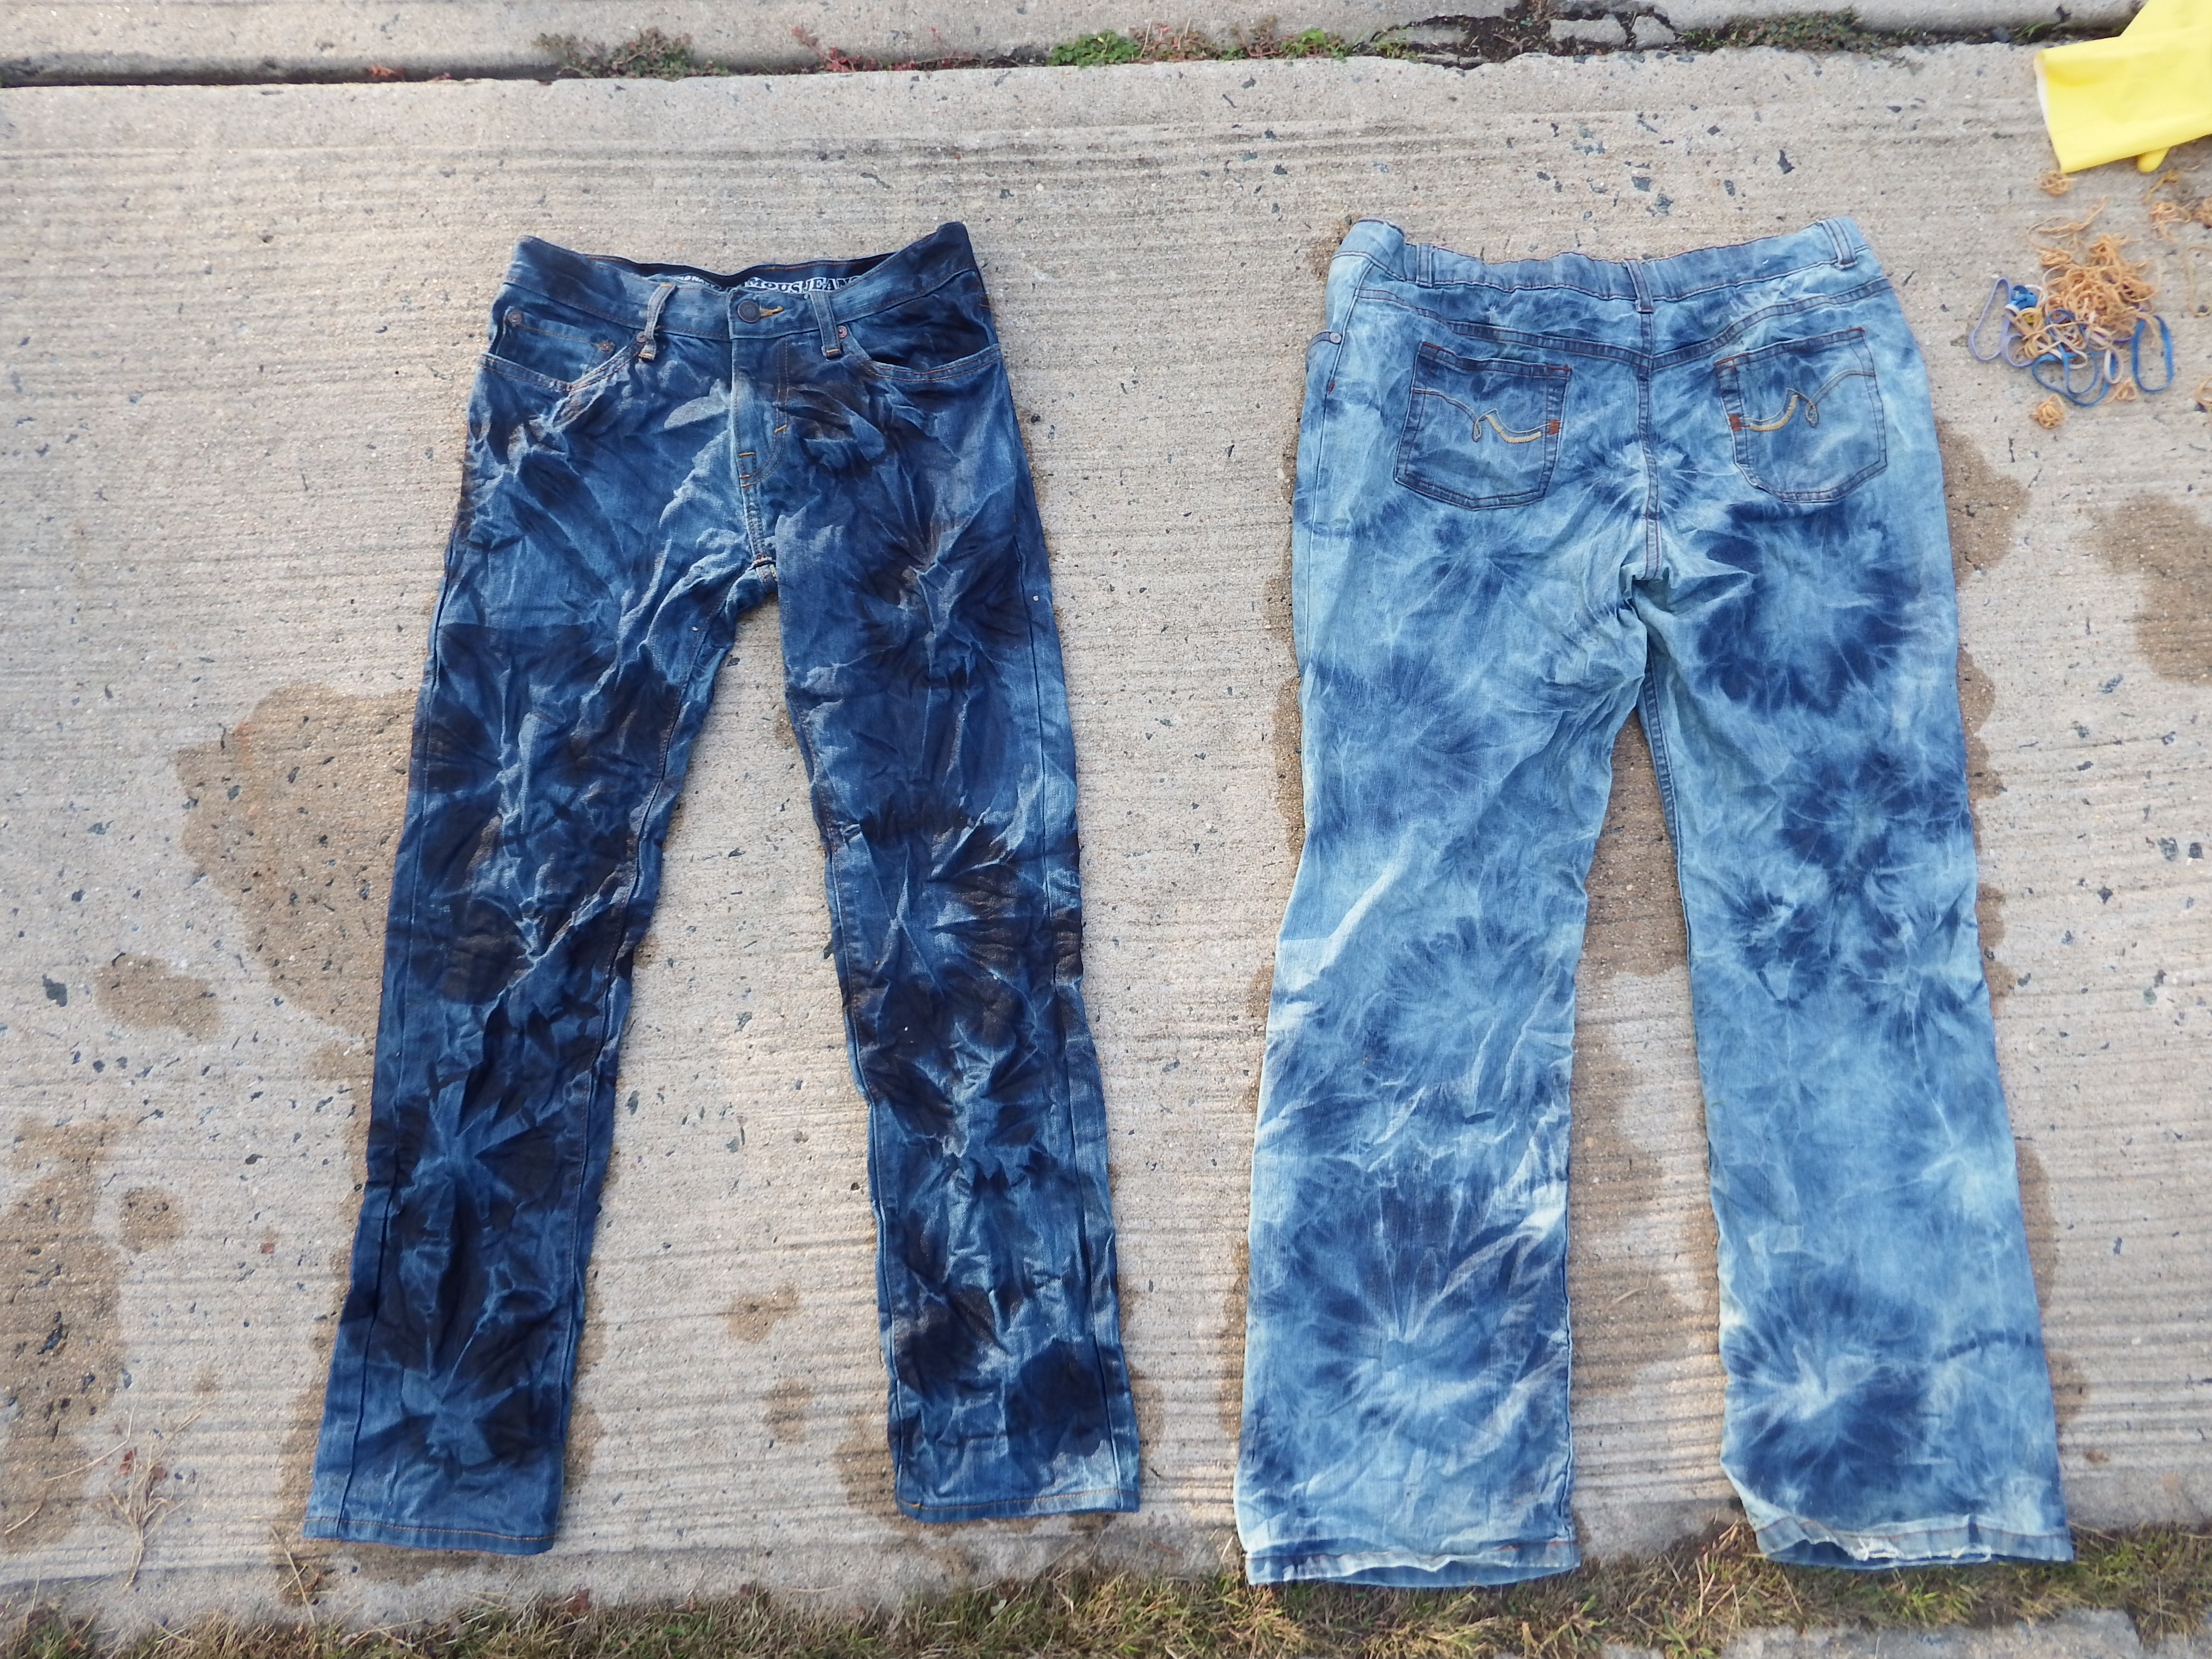 dry wash jeans